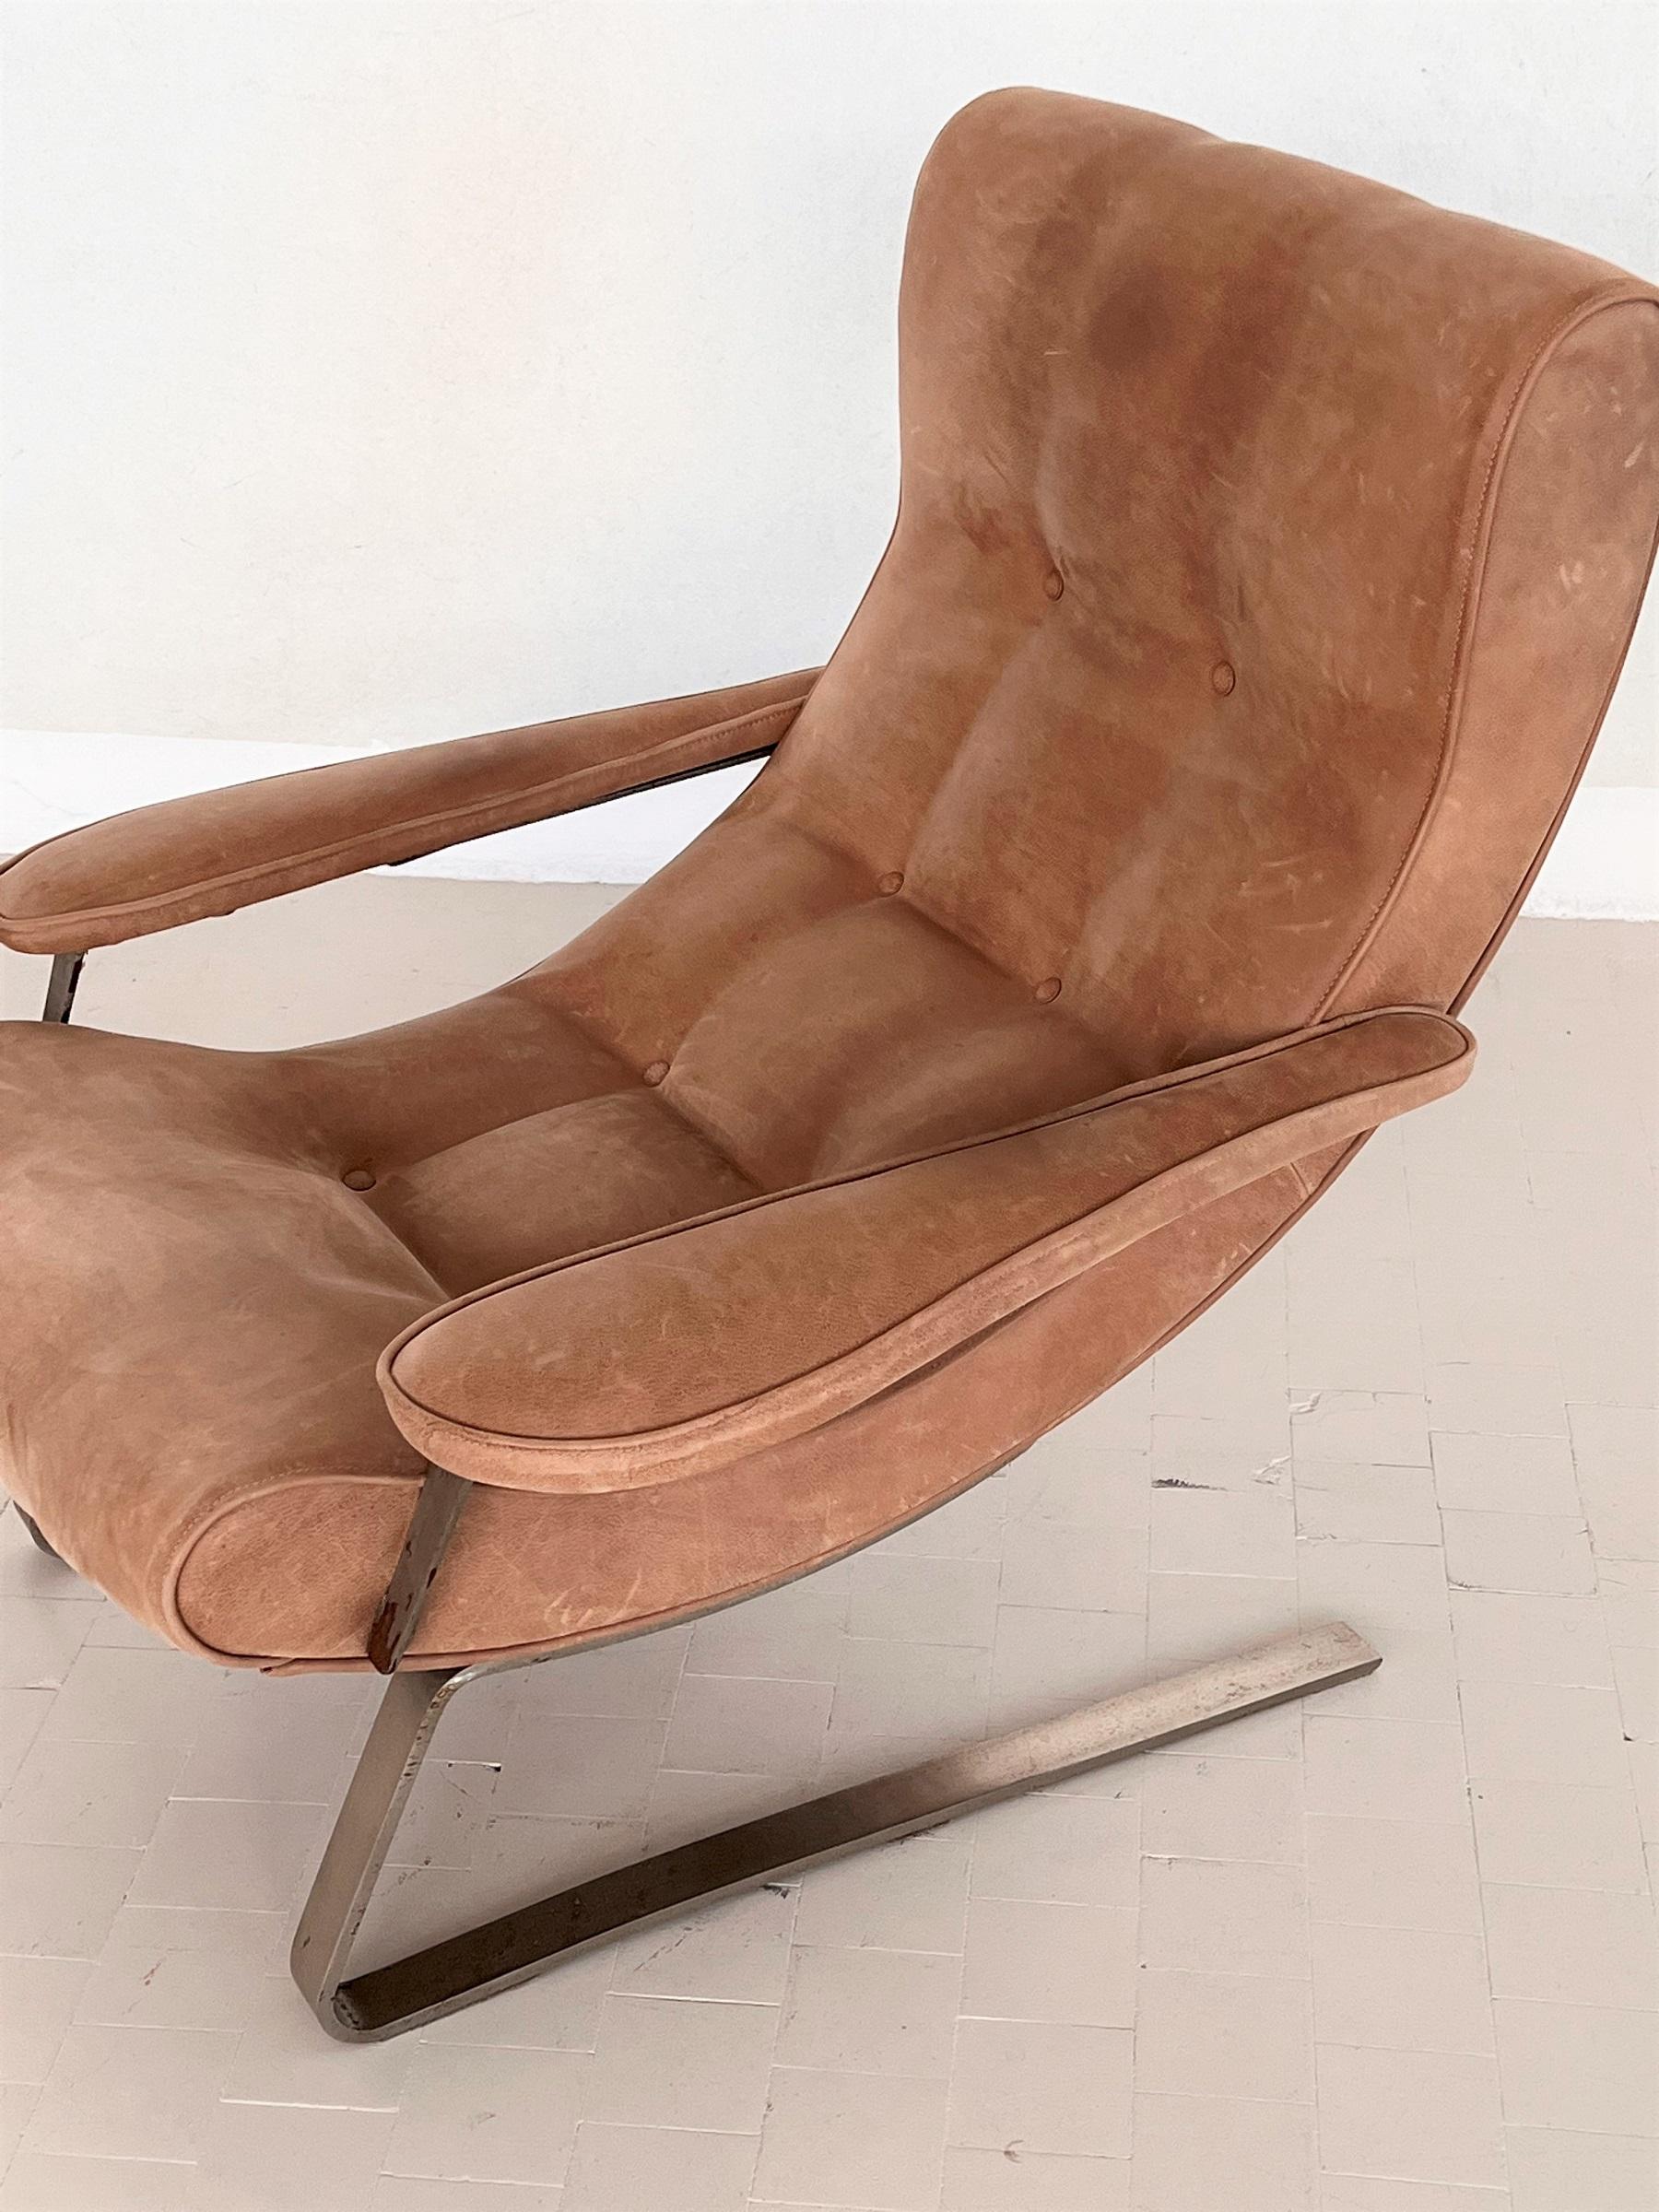 Midcentury Lounge Chair in Suede by Guido Bonzani for Tecnosalotto, 1970s For Sale 2